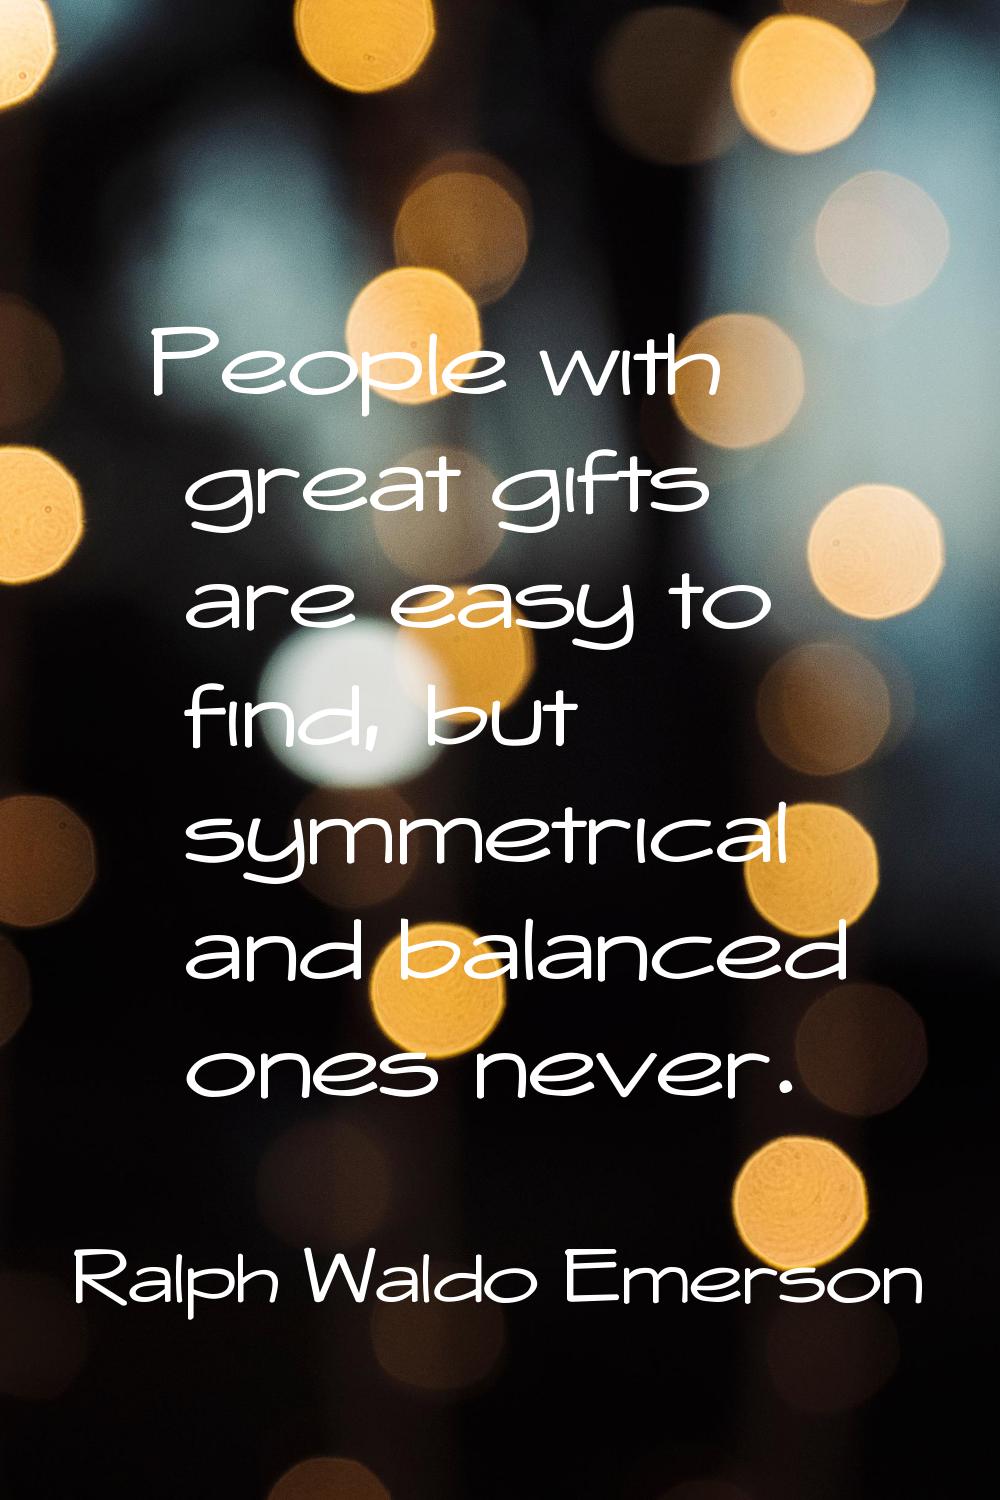 People with great gifts are easy to find, but symmetrical and balanced ones never.